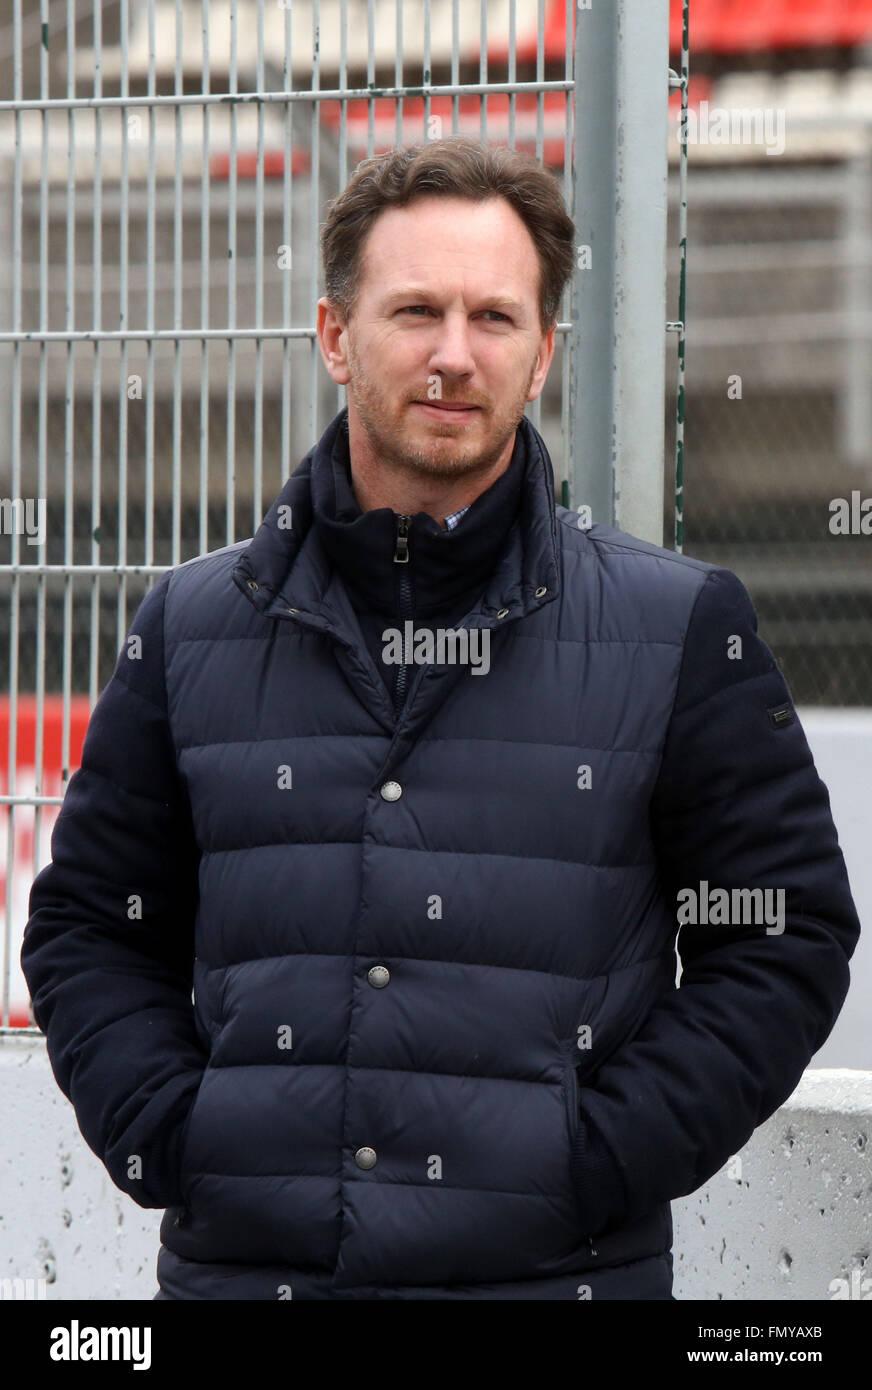 The team principal of Red Bull, British Christian Horner, seen during a training session for the upcoming Formula One season at the Circuit de Barcelona - Catalunya in Barcelona, Spain, 22 February 2016. Photo: Jens Buettner/dpa Stock Photo